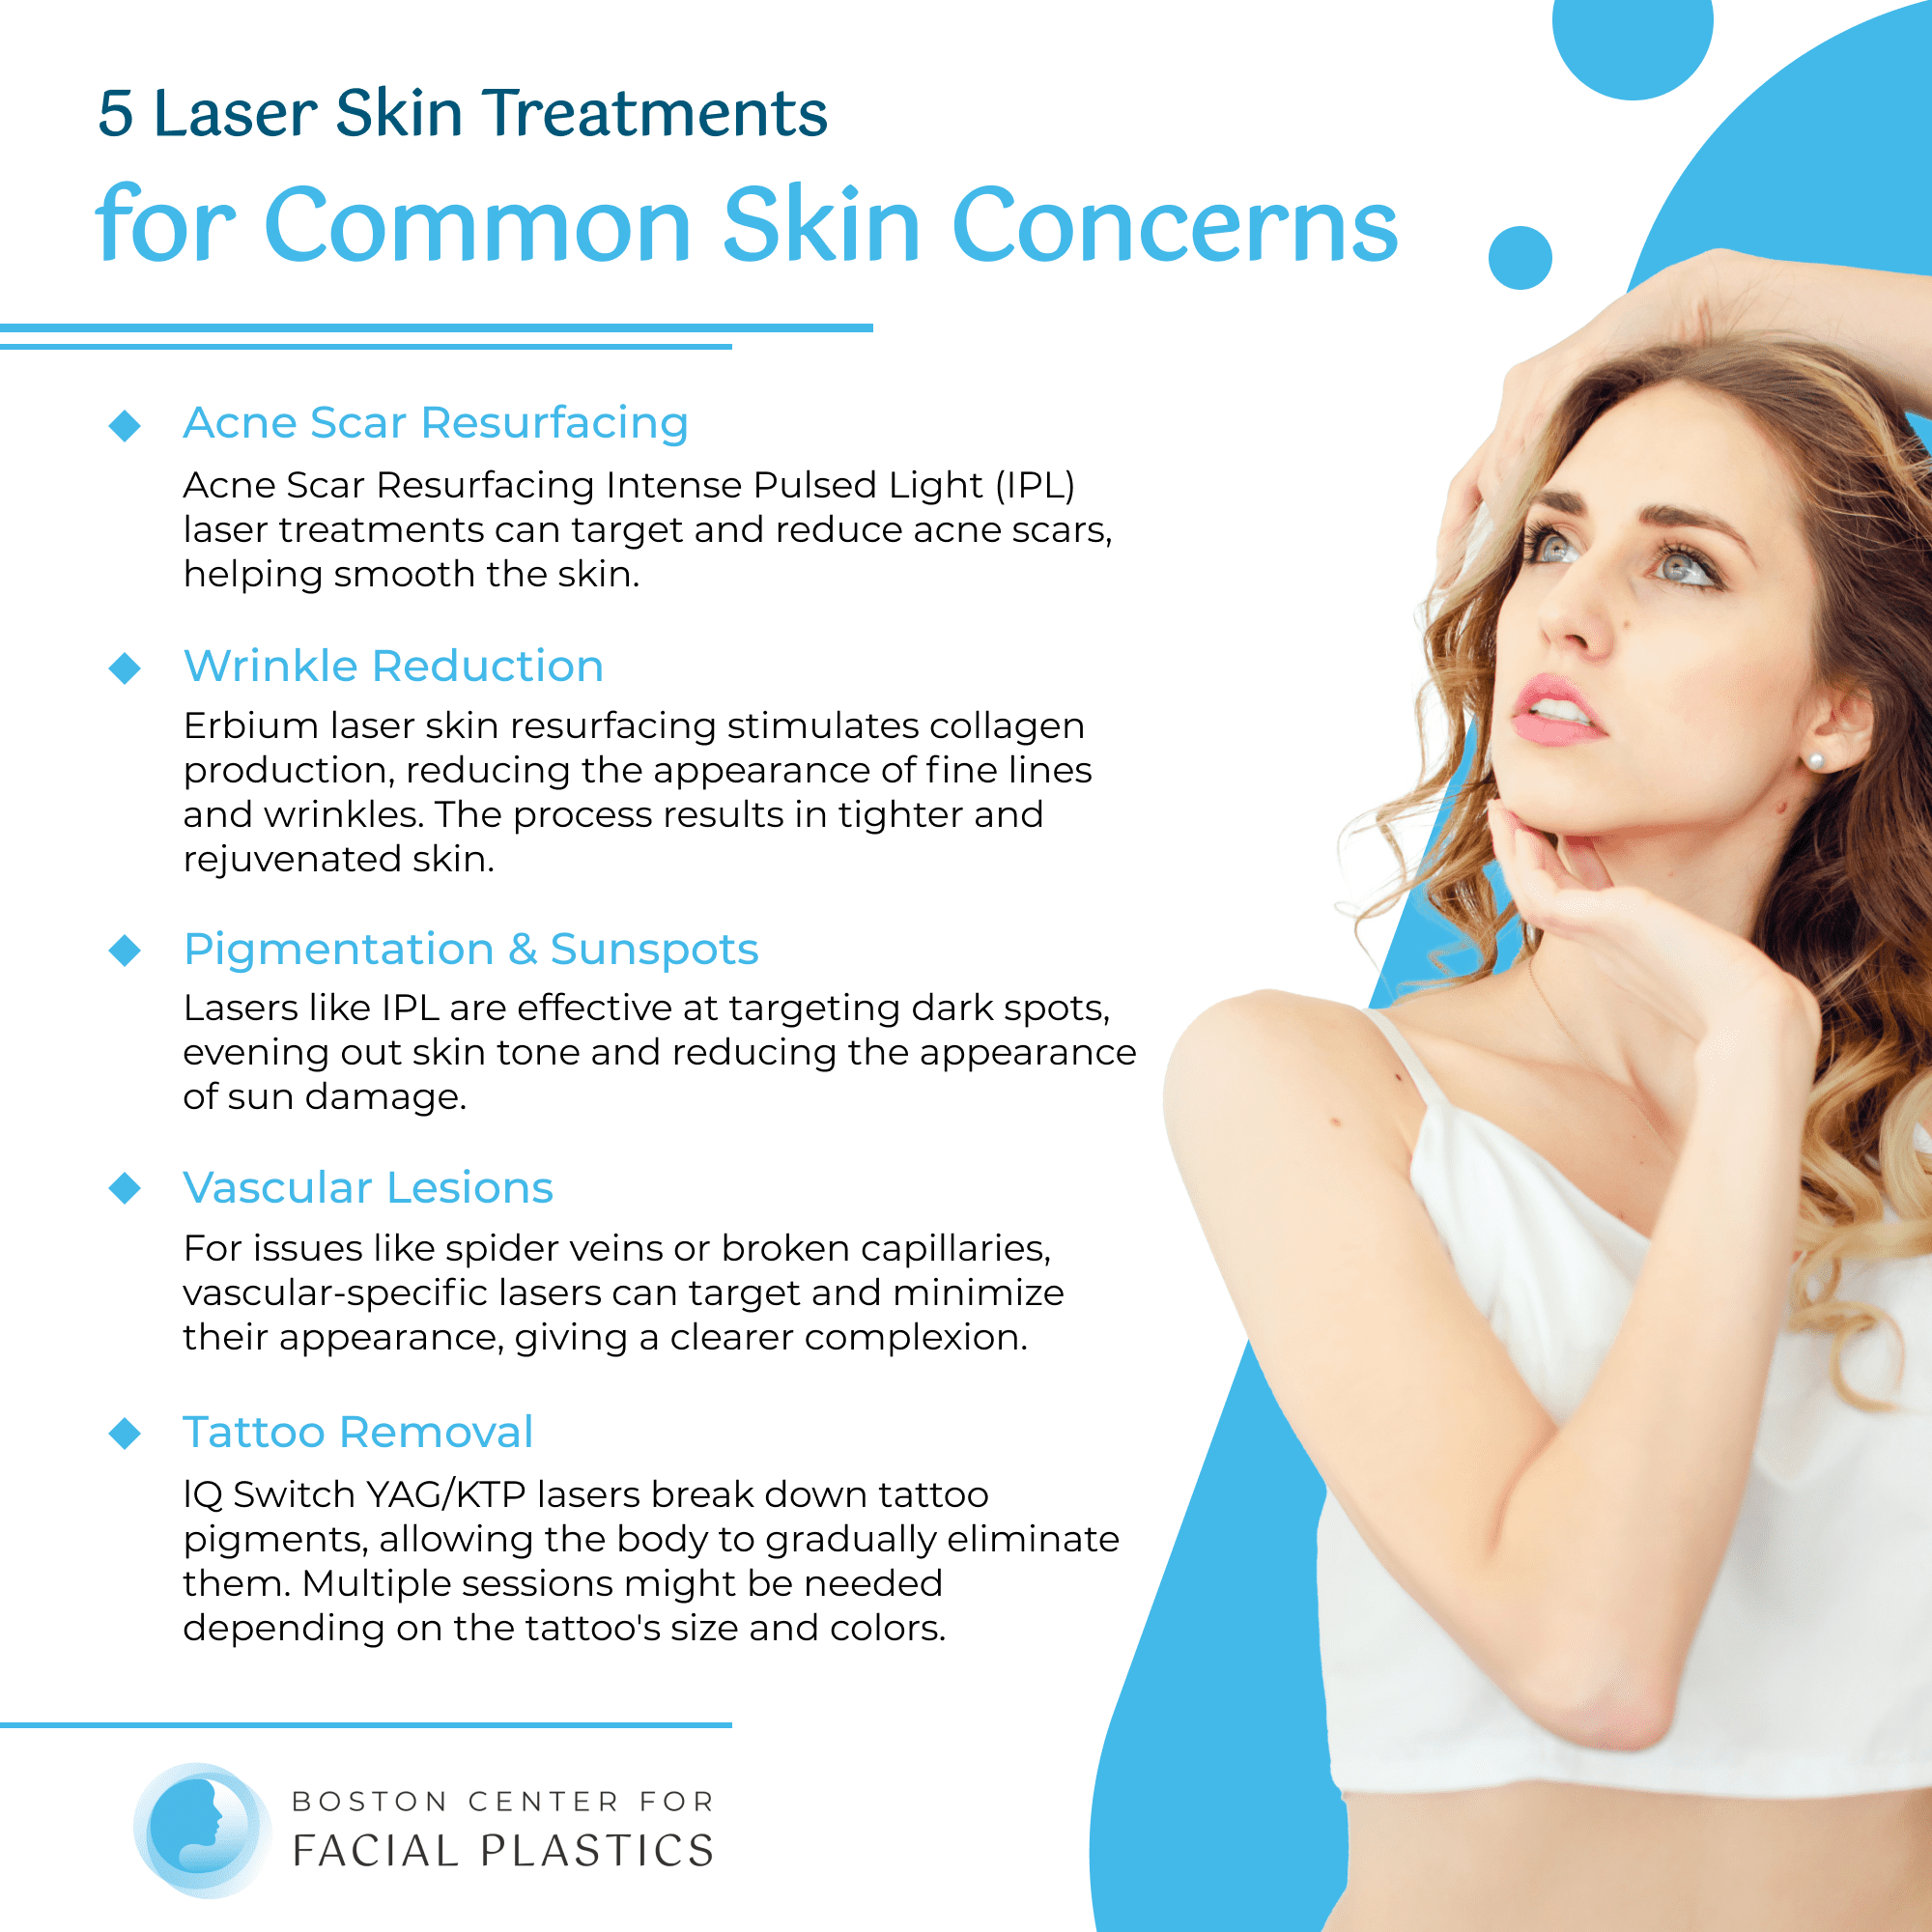 5 Laser Skin Treatments for Common Skin Concerns